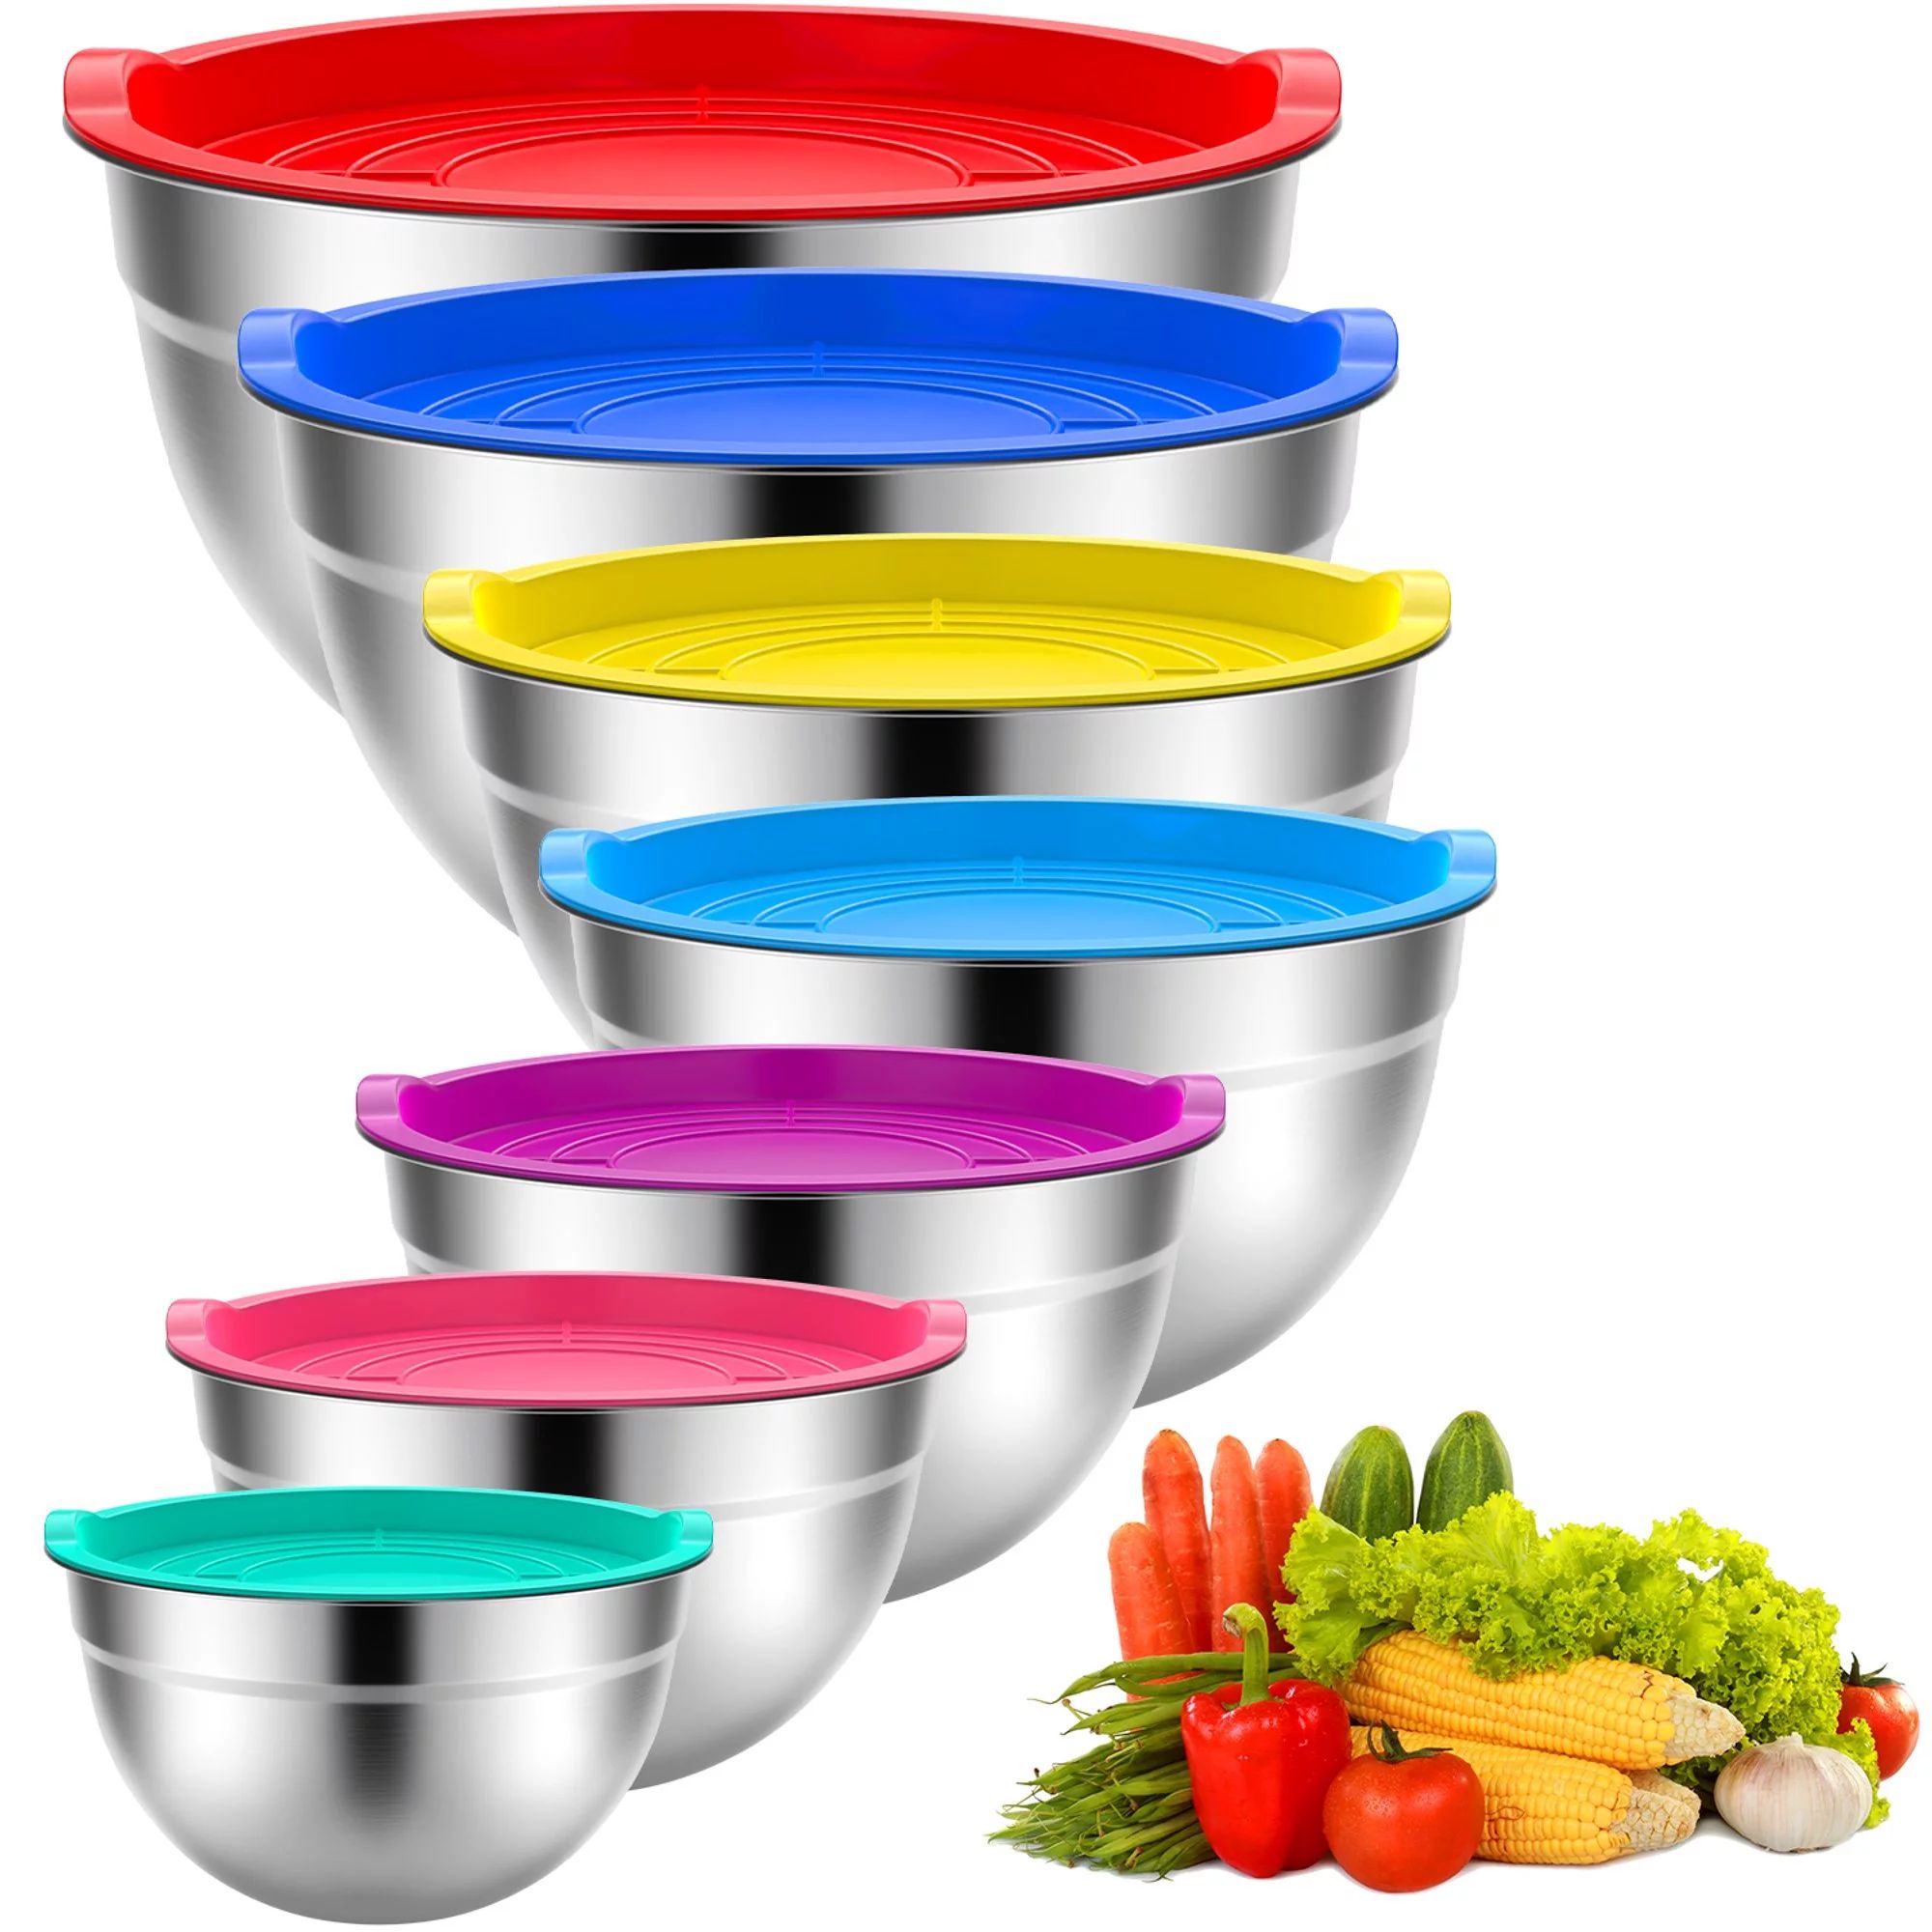 TINANA Mixing Bowls with Lids: Stainless Steel Mixing Bowls Set - 7PCS Metal Nesting Mixing Bowls... | Walmart (US)